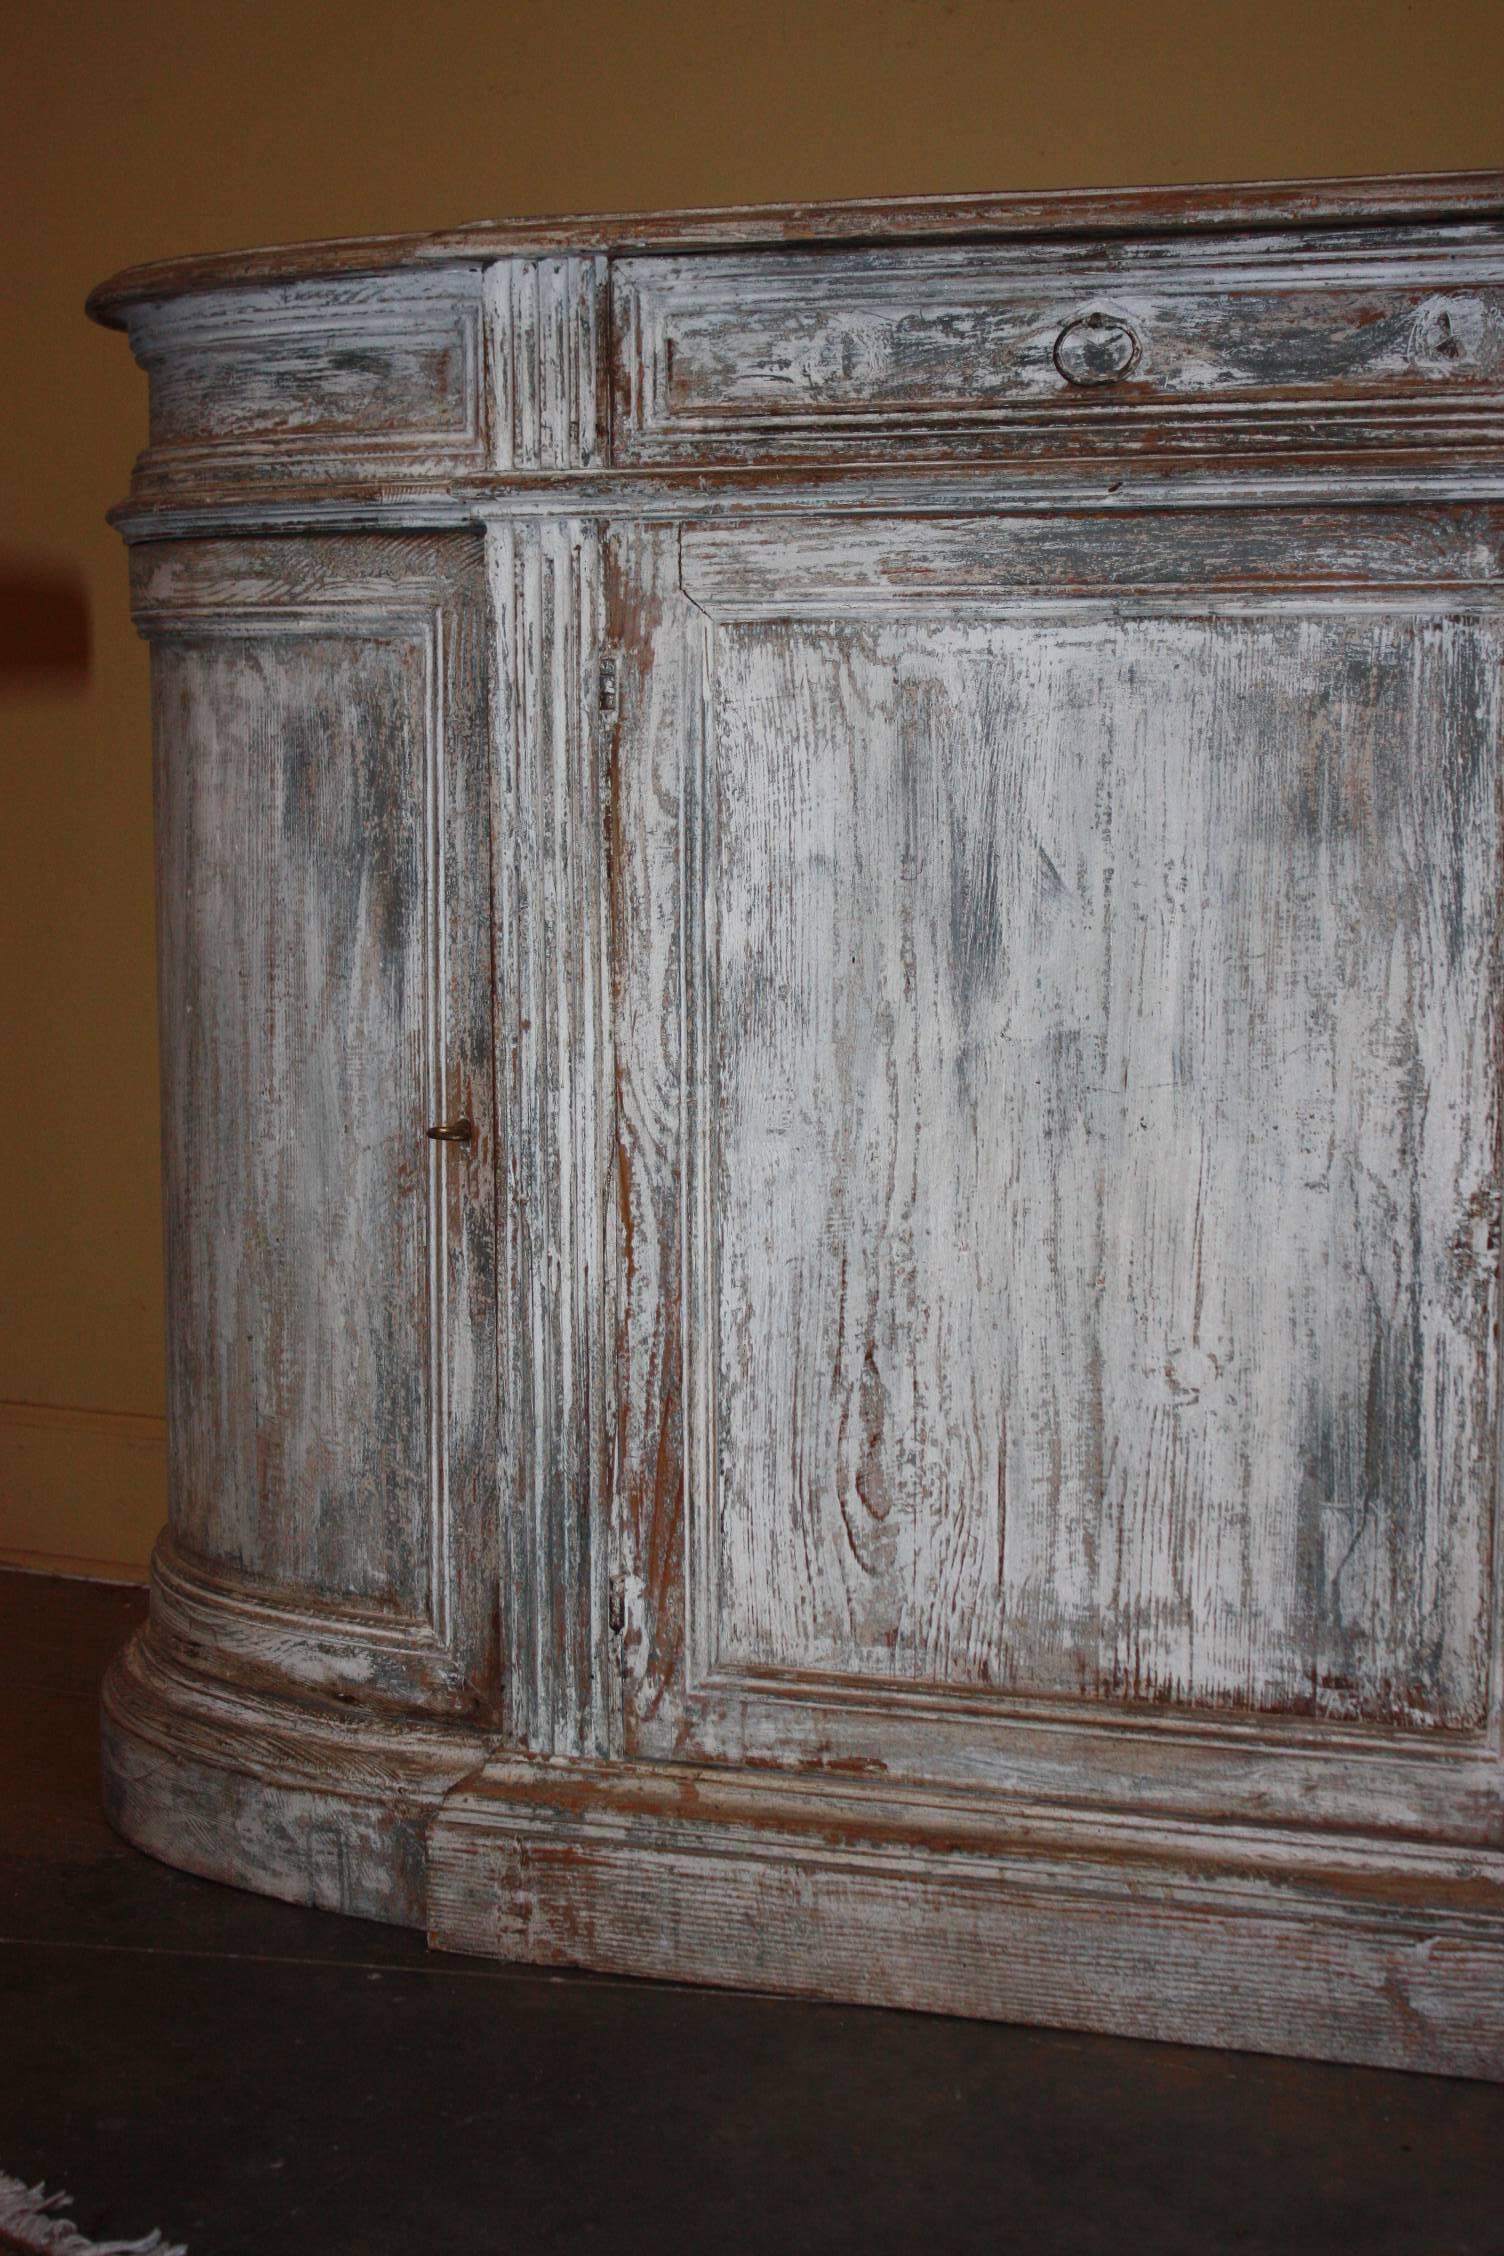 Italian painted buffet with clean lines and beautifully carved details having four separate storage compartments and two drawers above. This is a beautiful light white and French blue painted piece with natural wood showing through. Would complement